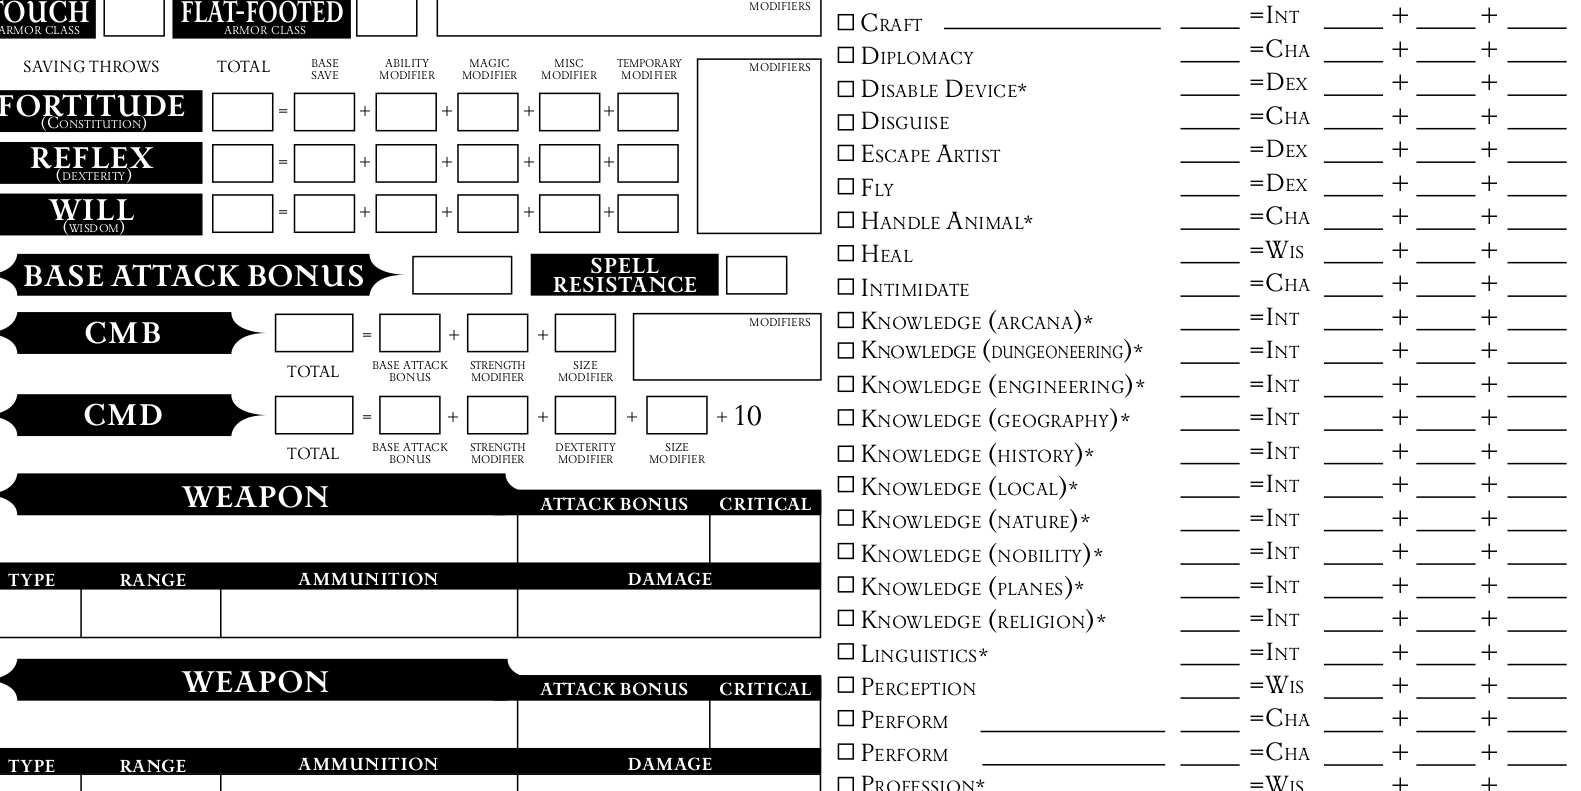 The default Pathfinder character sheet